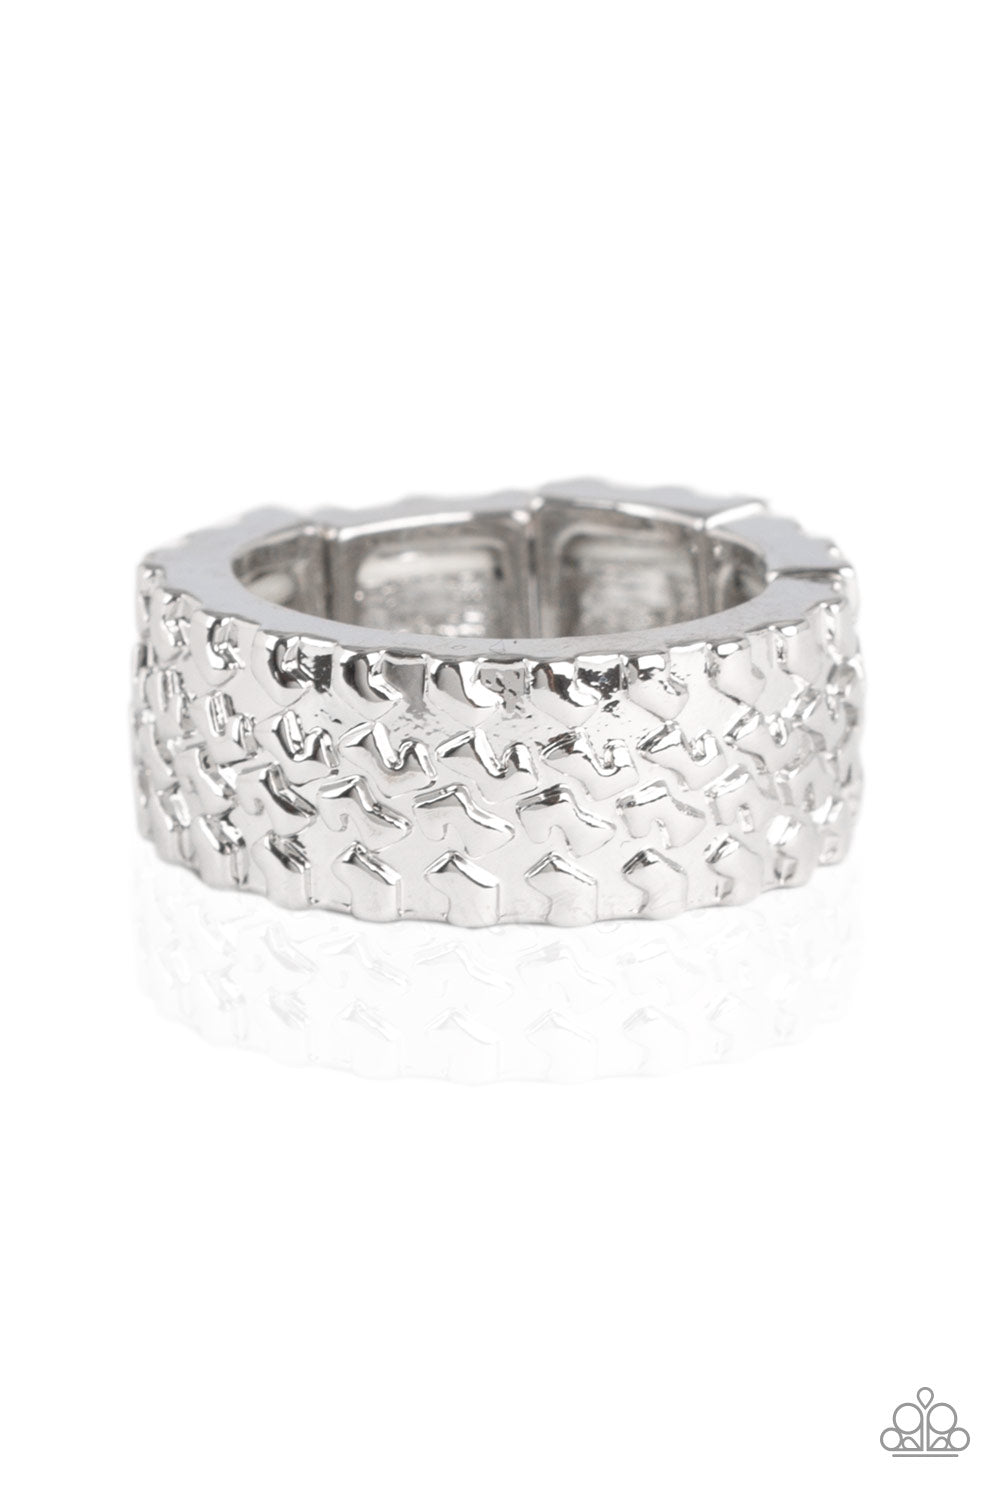 paparazzi-accessories-all-wheel-drive-silver-ring